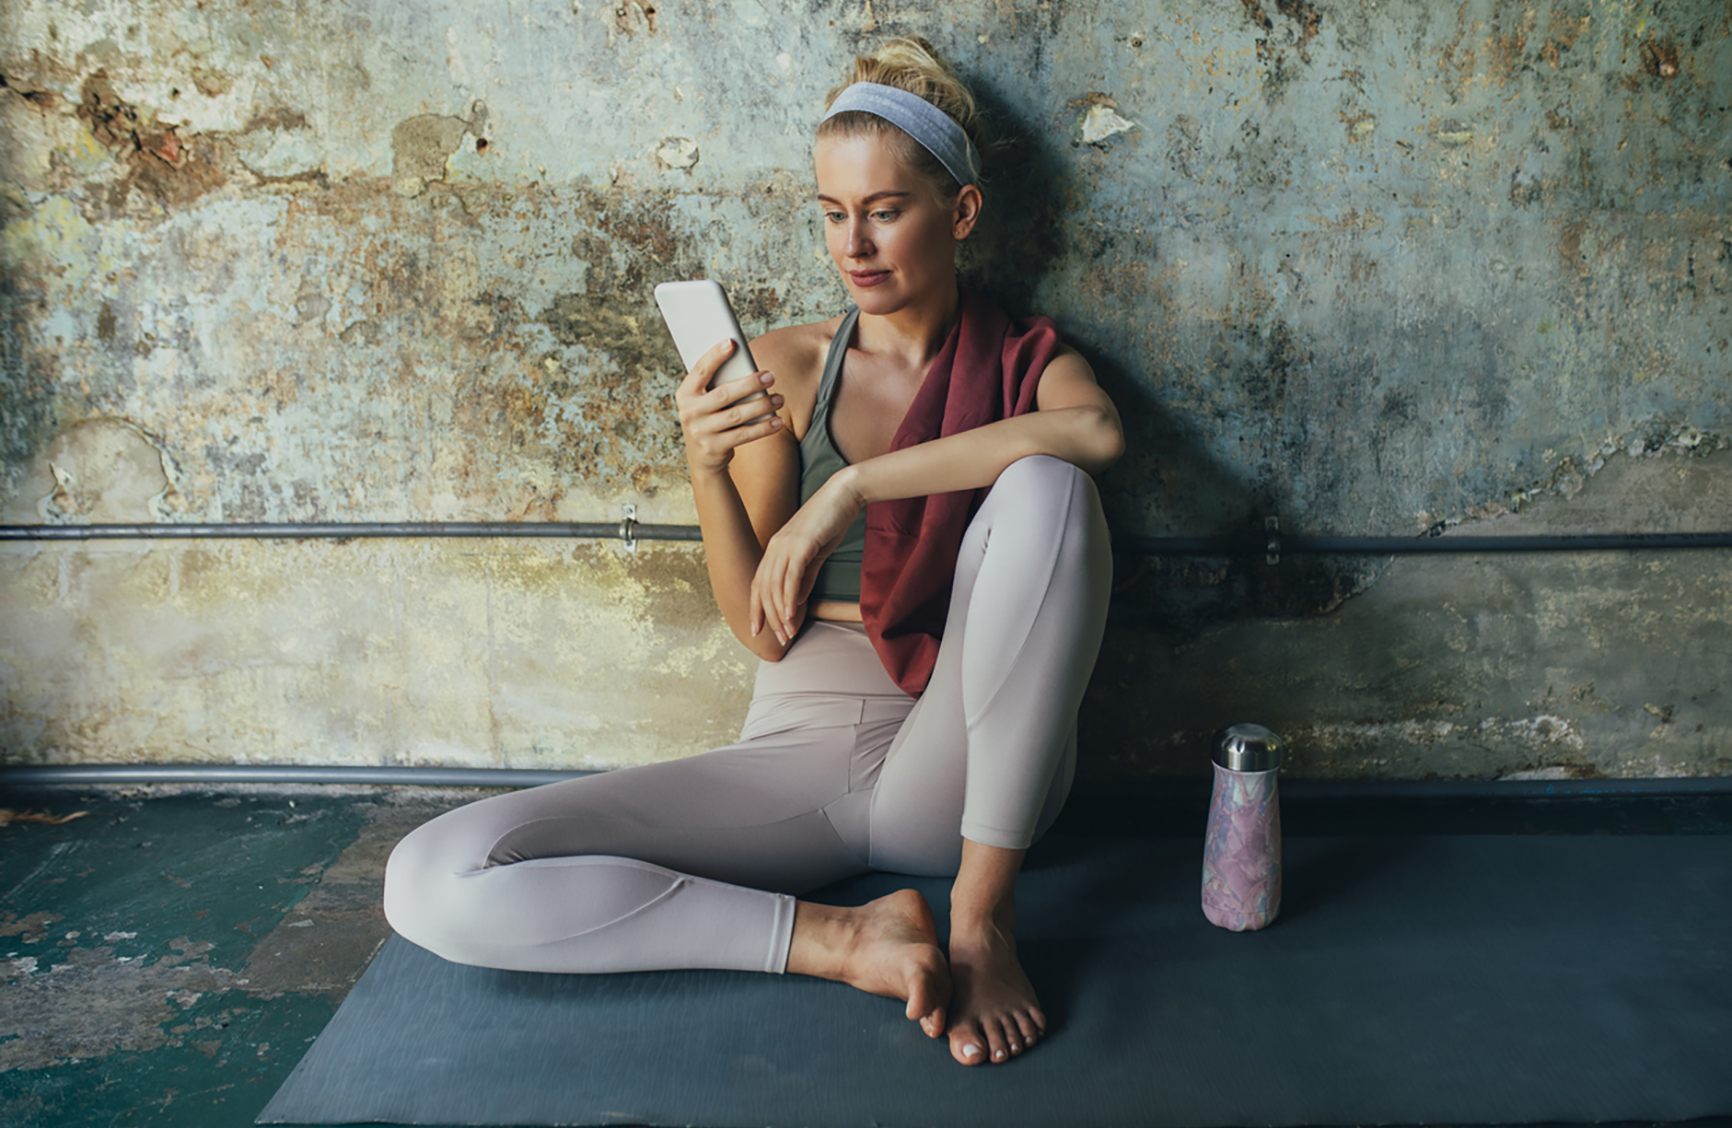 A beautiful blonde woman resting on a mat after doing yoga and scrolling through her smartphone